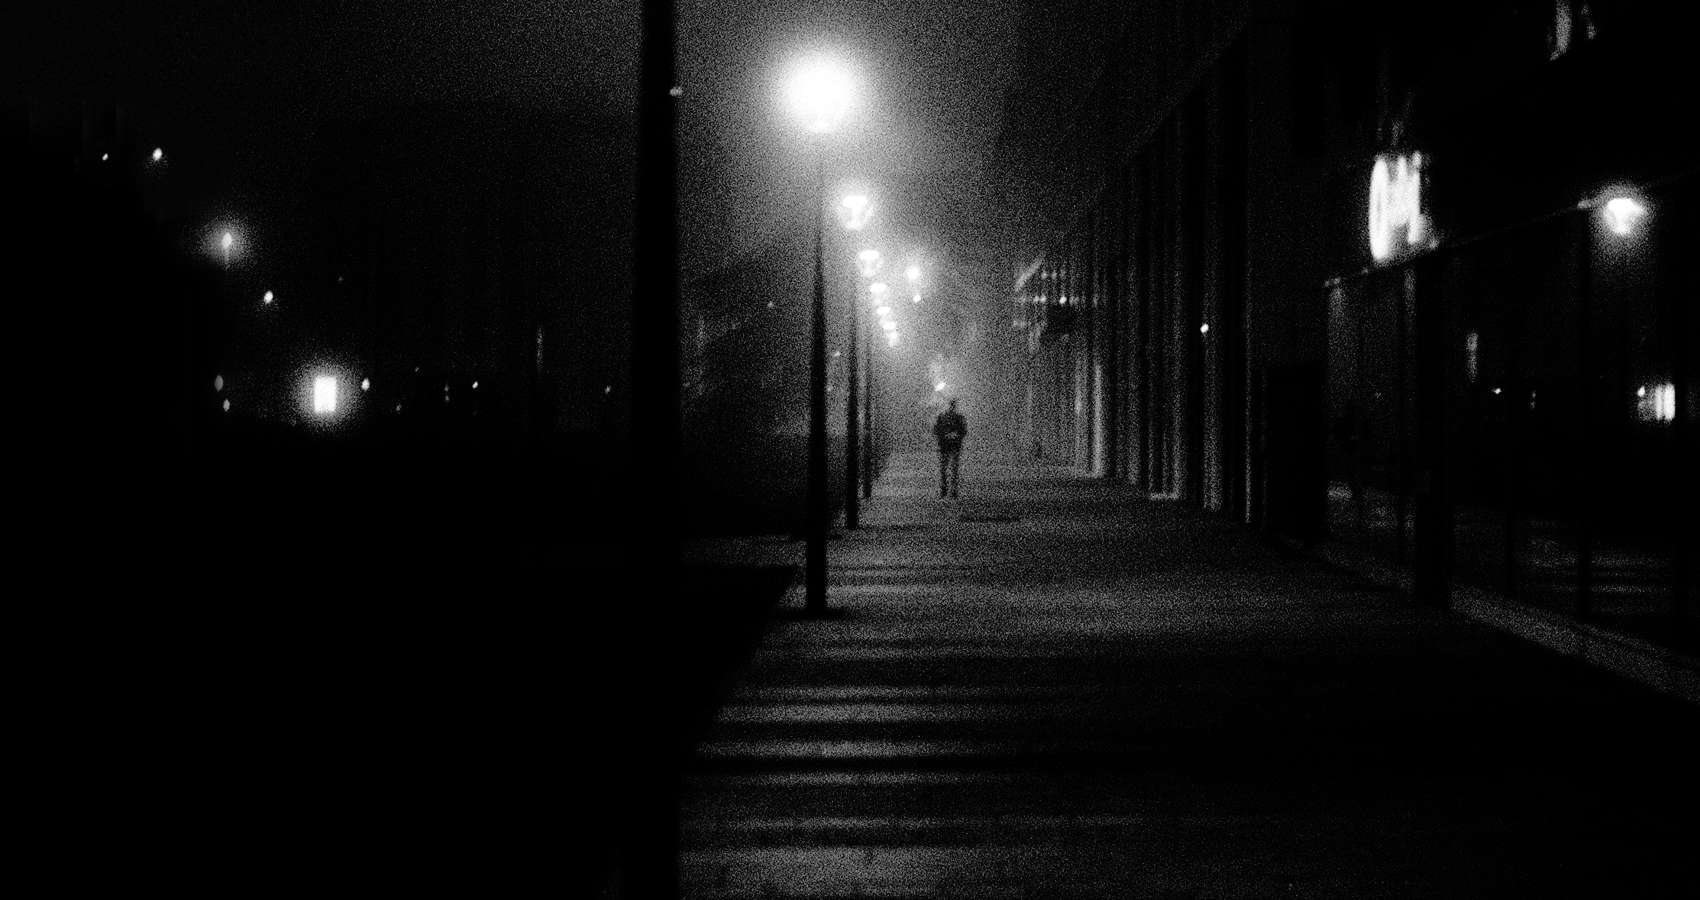 Dark at The End of The Street by Tom Alexander at Spillwords.com